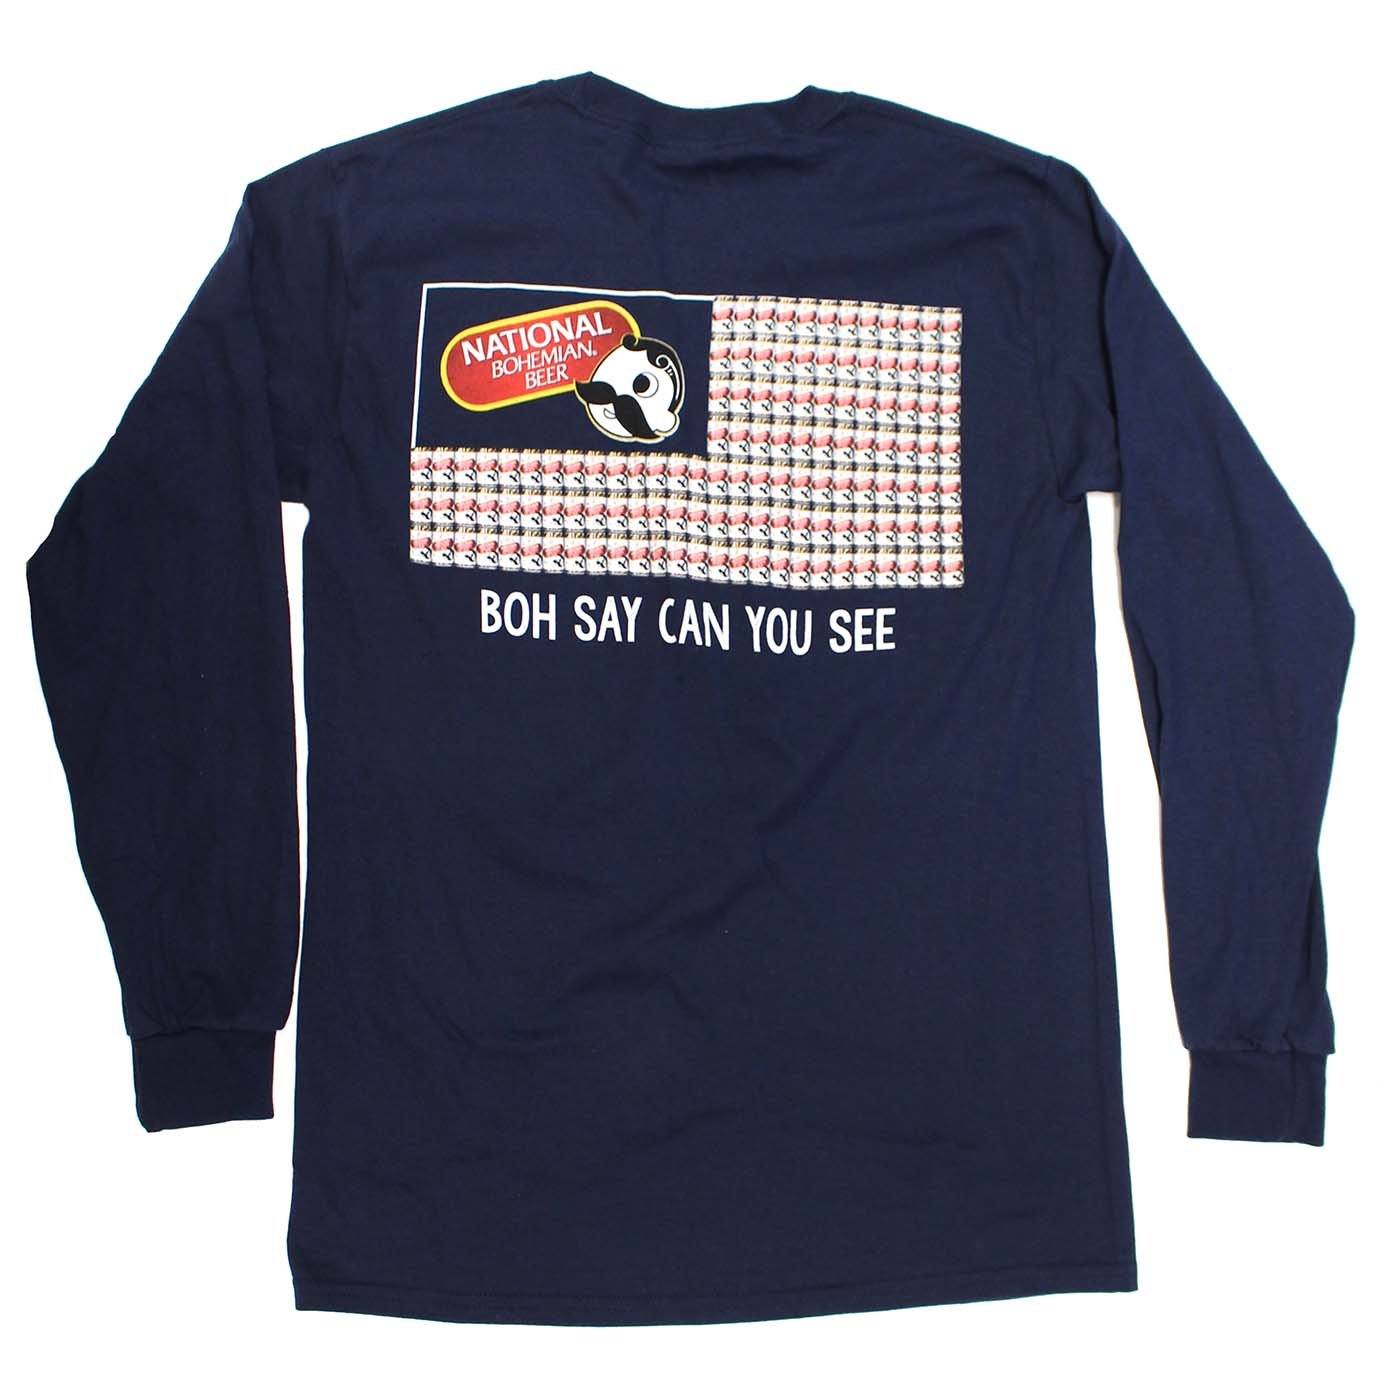 Boh Say Can You See (Navy) / Long Sleeve Shirt - Route One Apparel